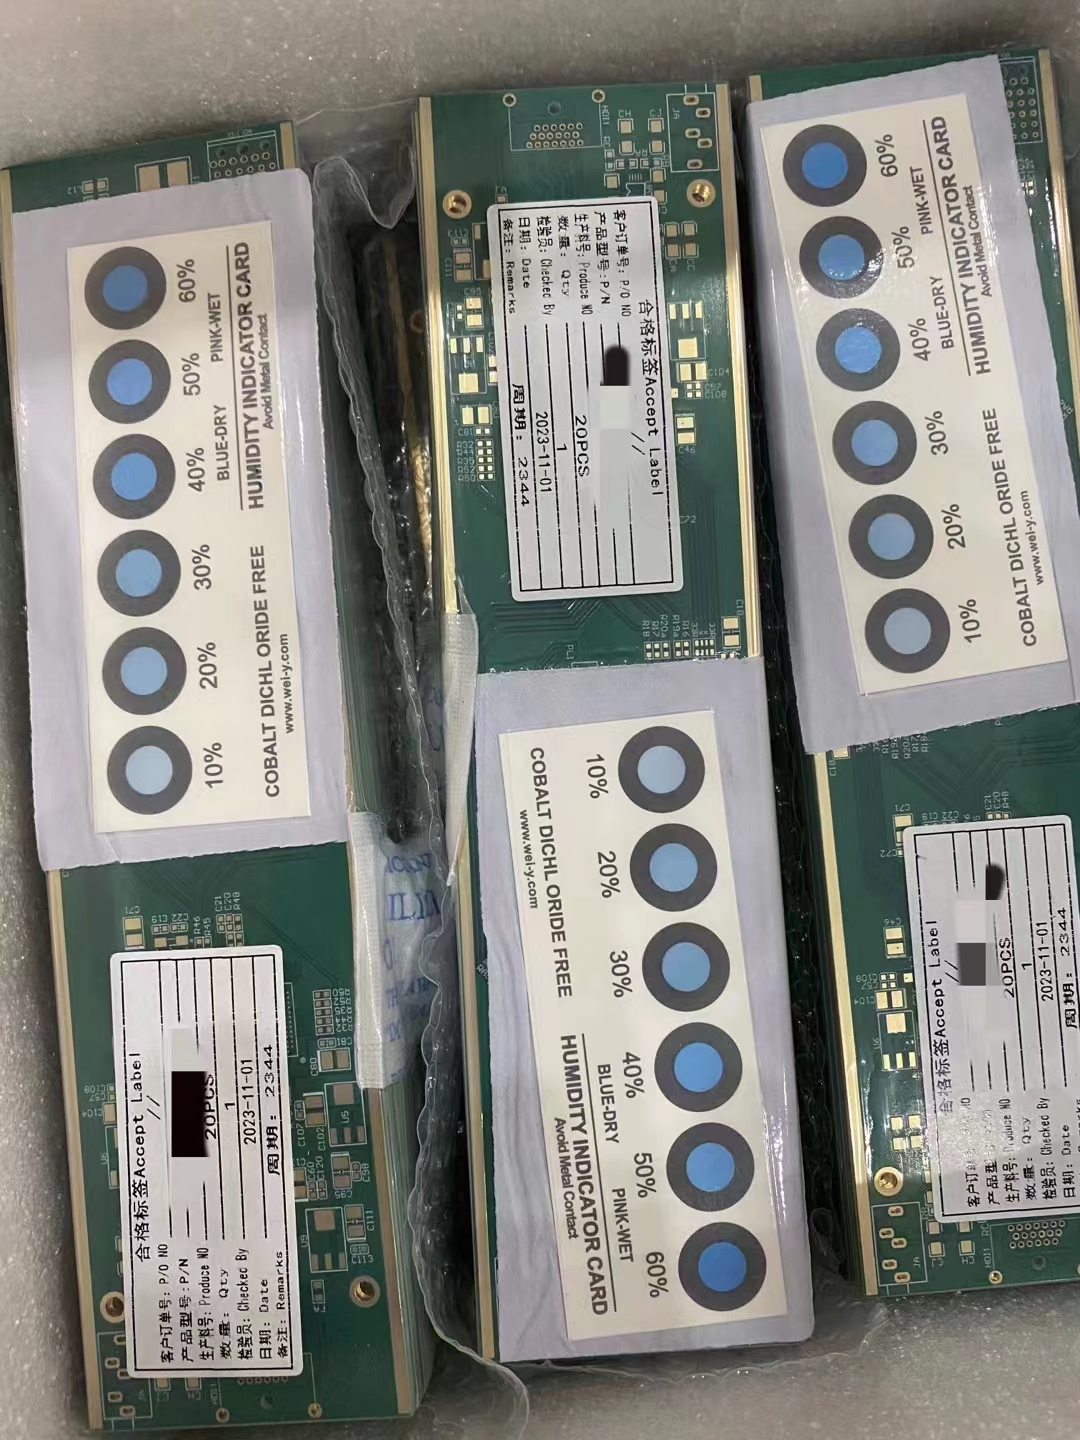 New PCB products ready for shipment__Shenzhen Vip Circuit Co., Ltd.